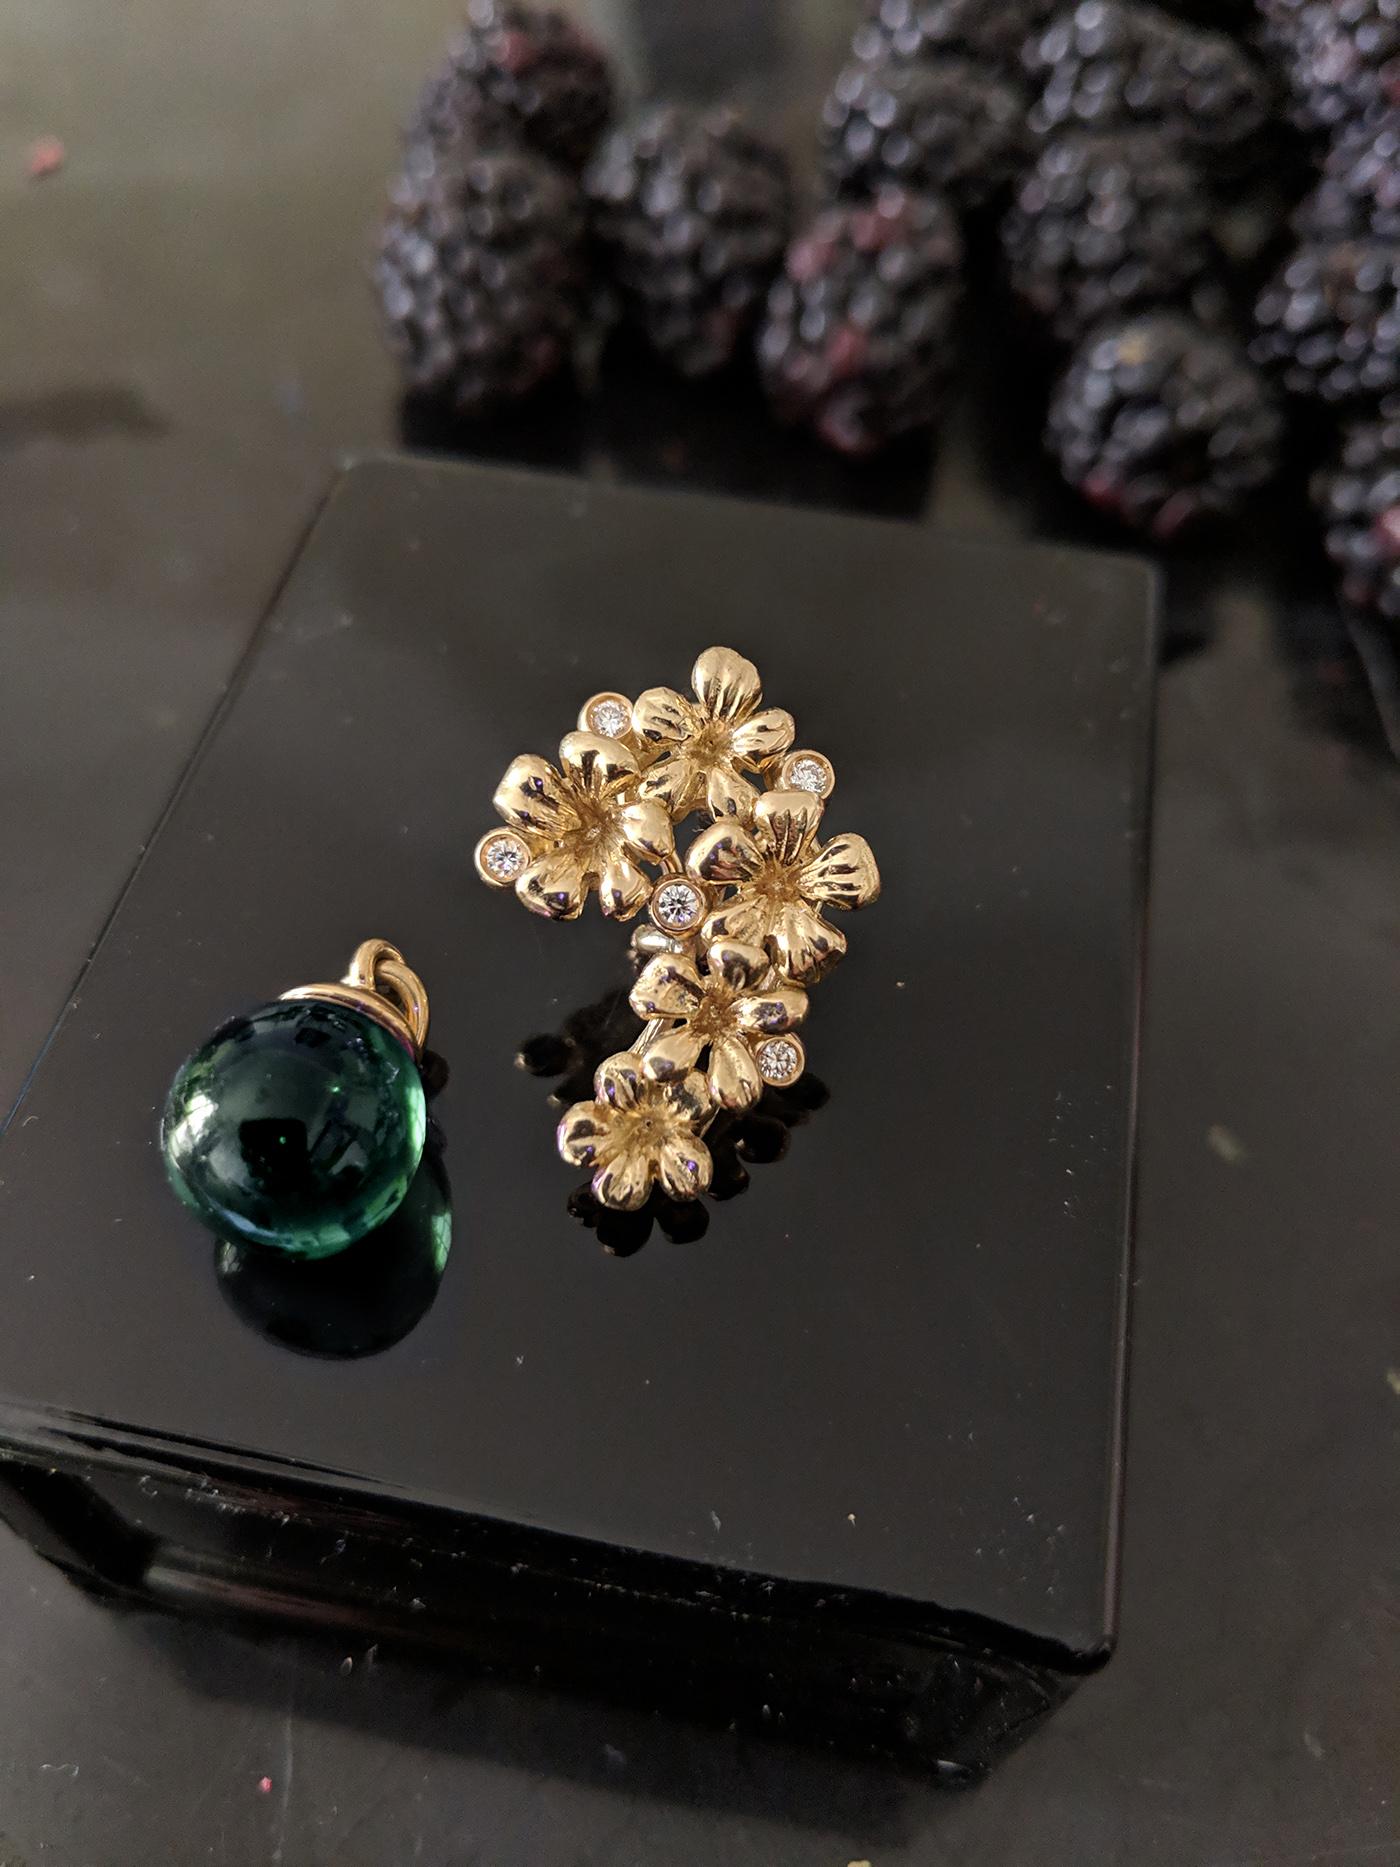 18 karat yellow gold Plum Blossom brooch is encrusted with 5 round diamonds and green cabochon removable drop of tourmaline. This contemporary jewellery collection has been featured in Vogue UA review. We use top natural diamonds VS, F-G, we work